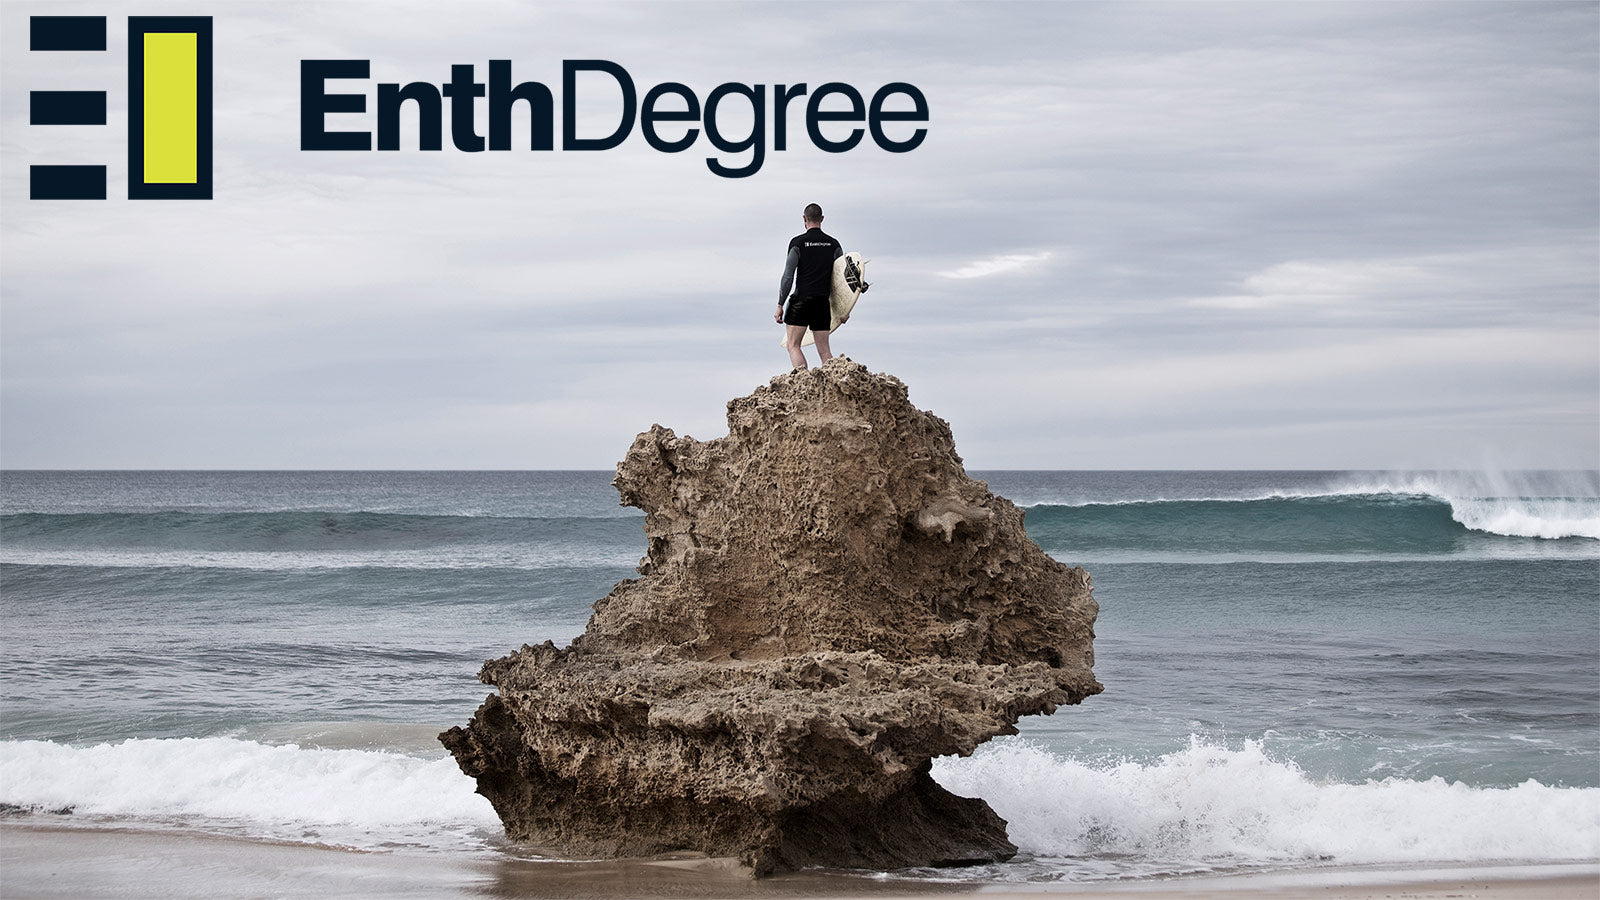 Enth Degree - Technical Thermals and Water wear